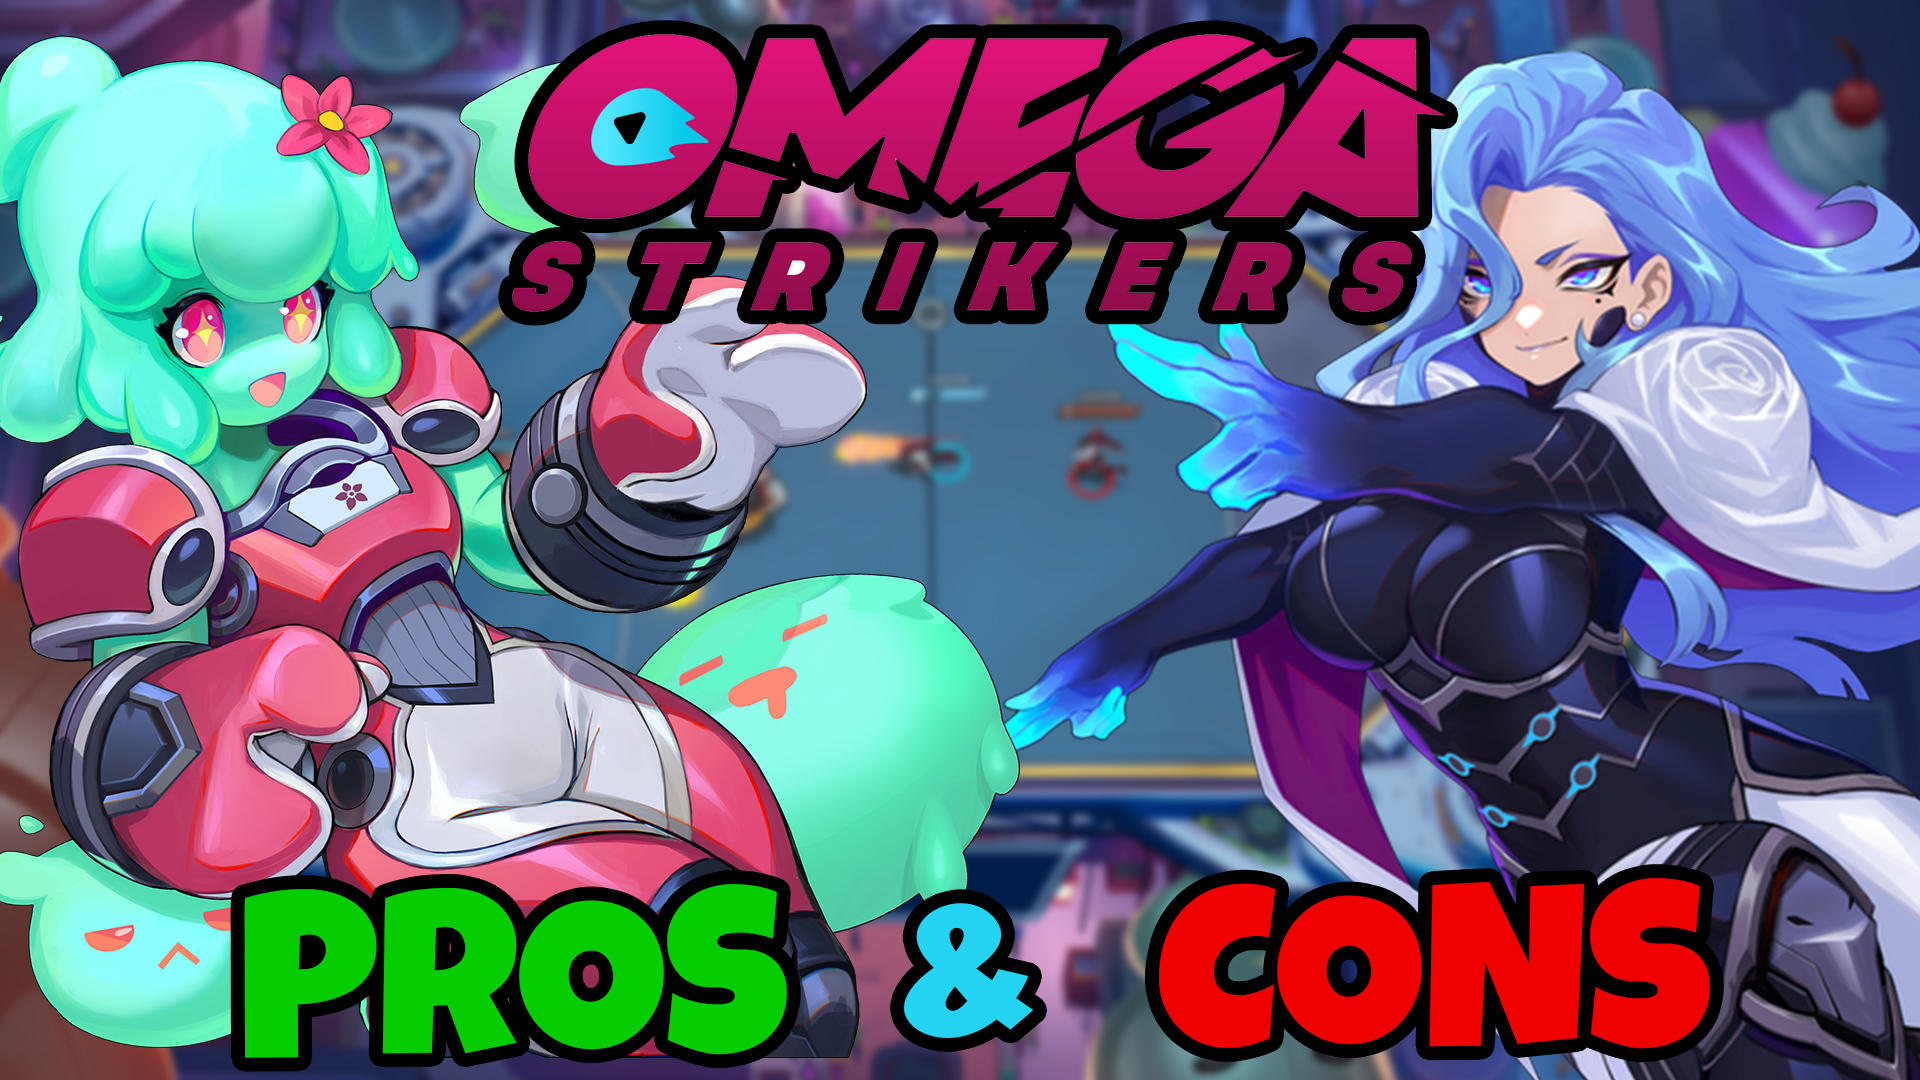 If you like Brawl Stars, anime, or soccer, this game is perfect for you -  Omega Strikers - TapTap